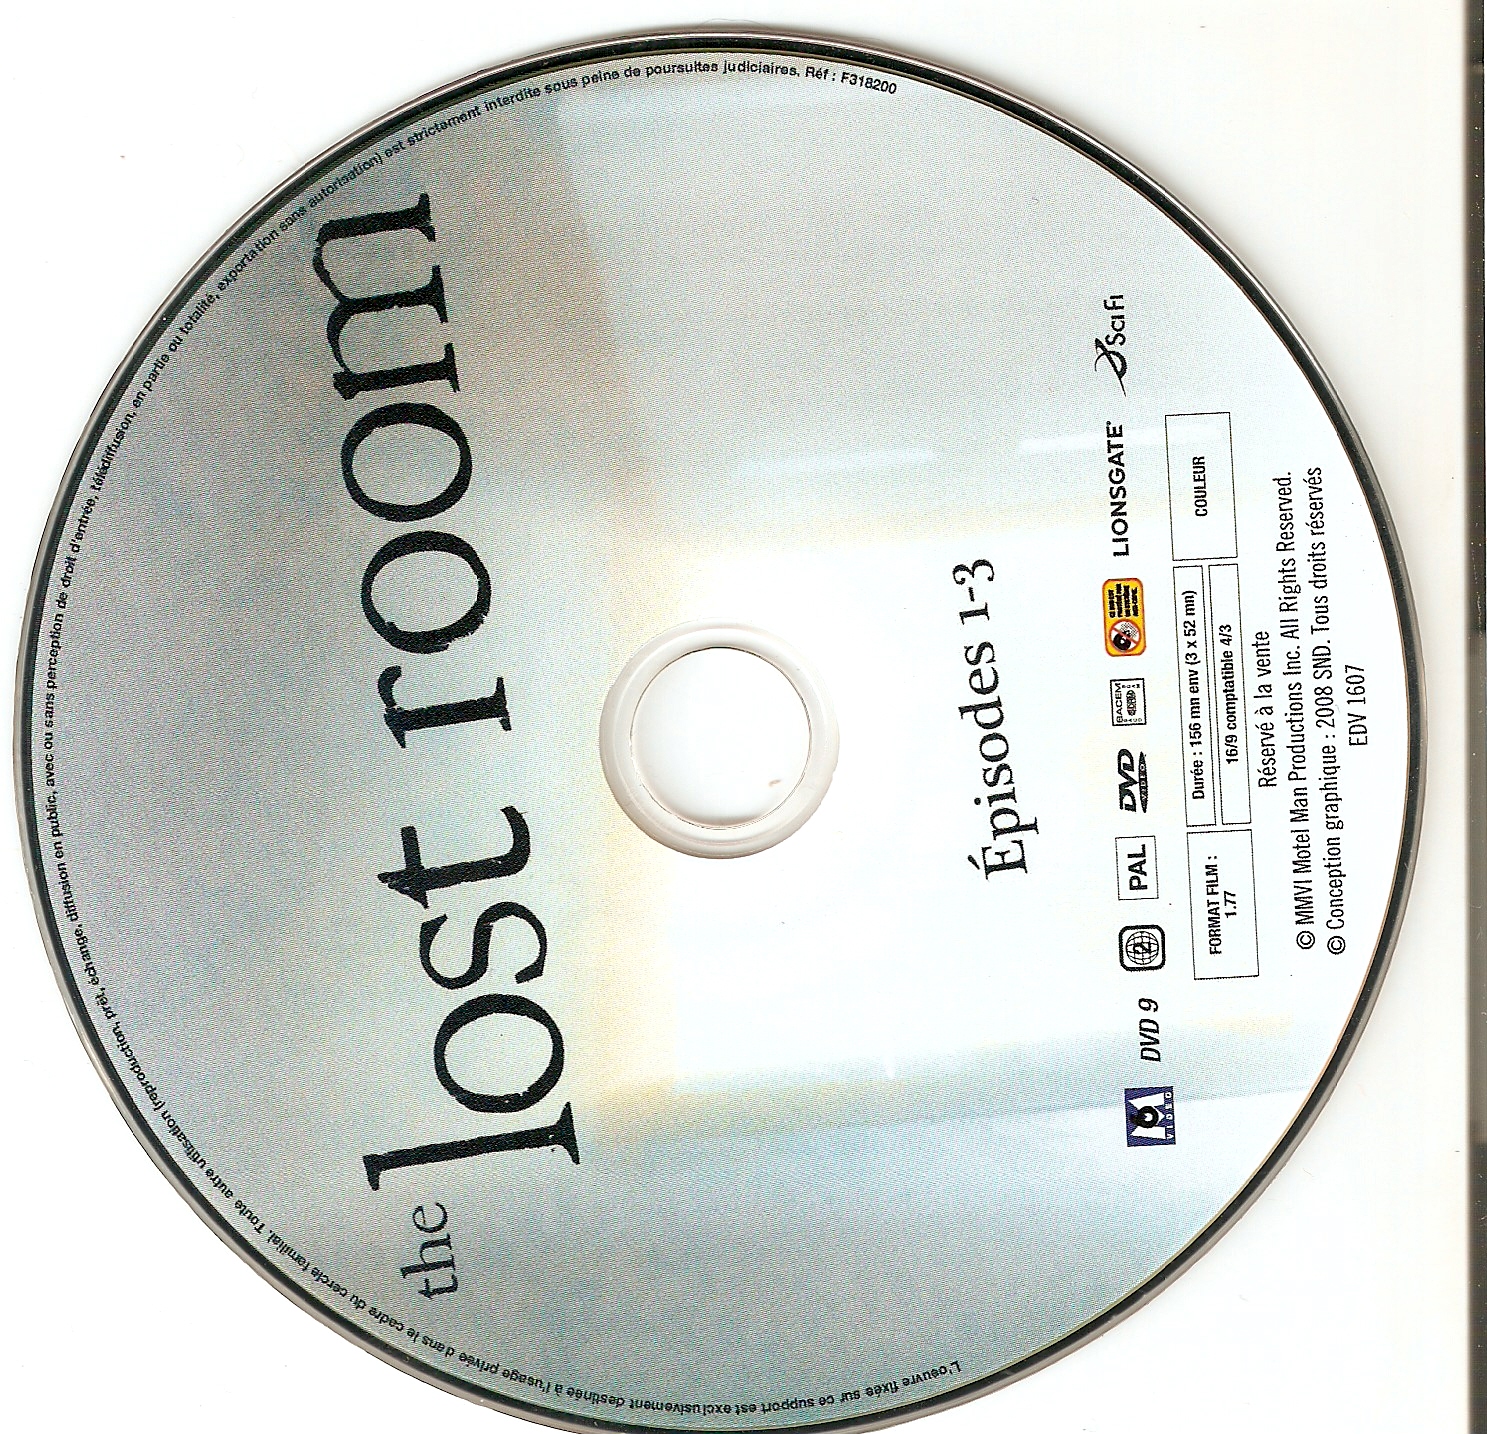 The lost room DVD 1